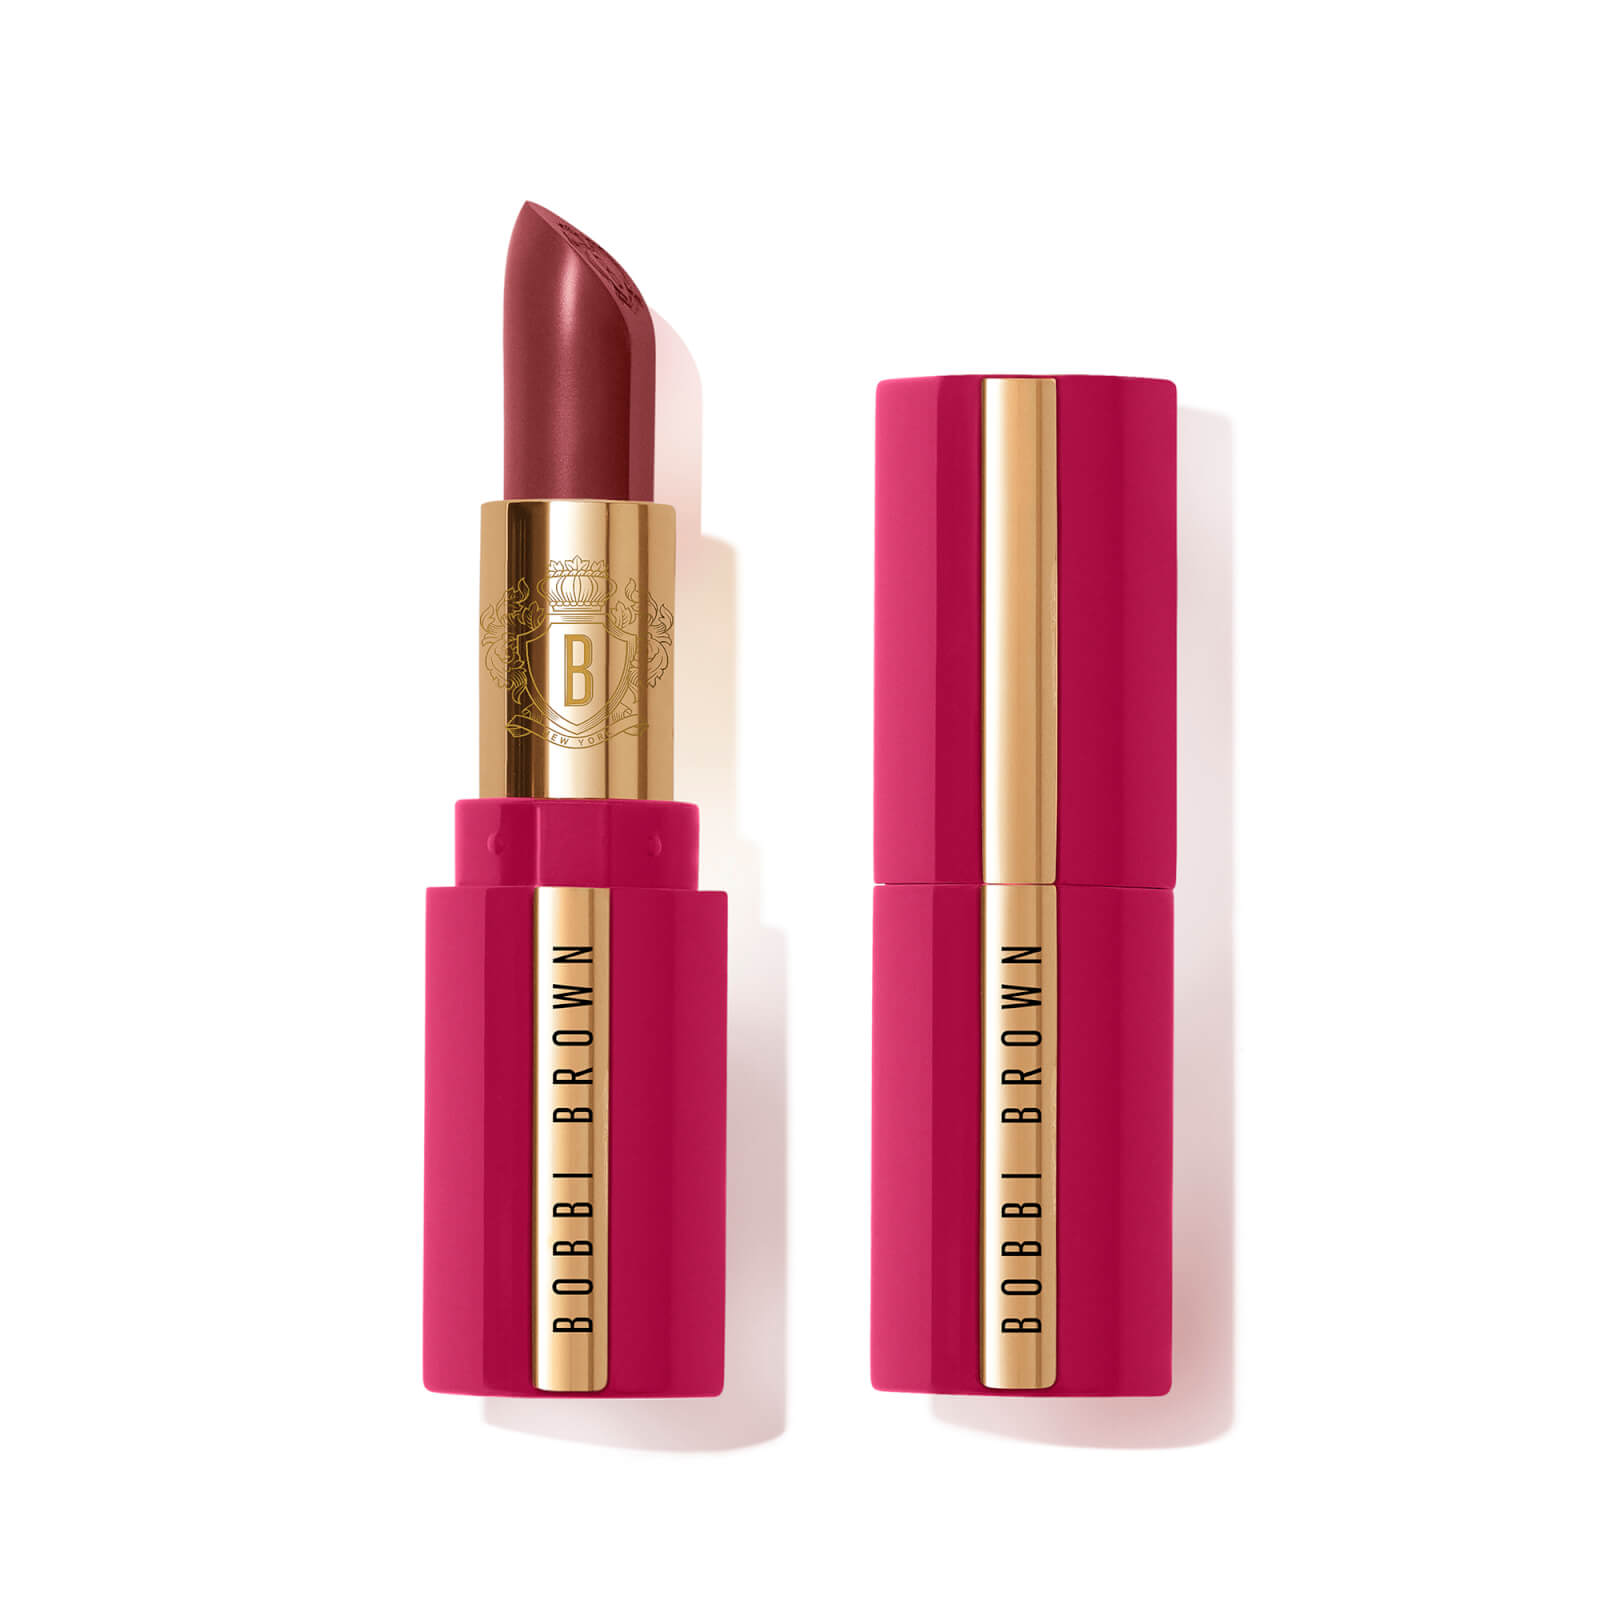 Image of Bobbi Brown Lunar New Year Collection Luxe Lipstick 3.5g (Various Shades) (Worth 45.00€) - Ruby